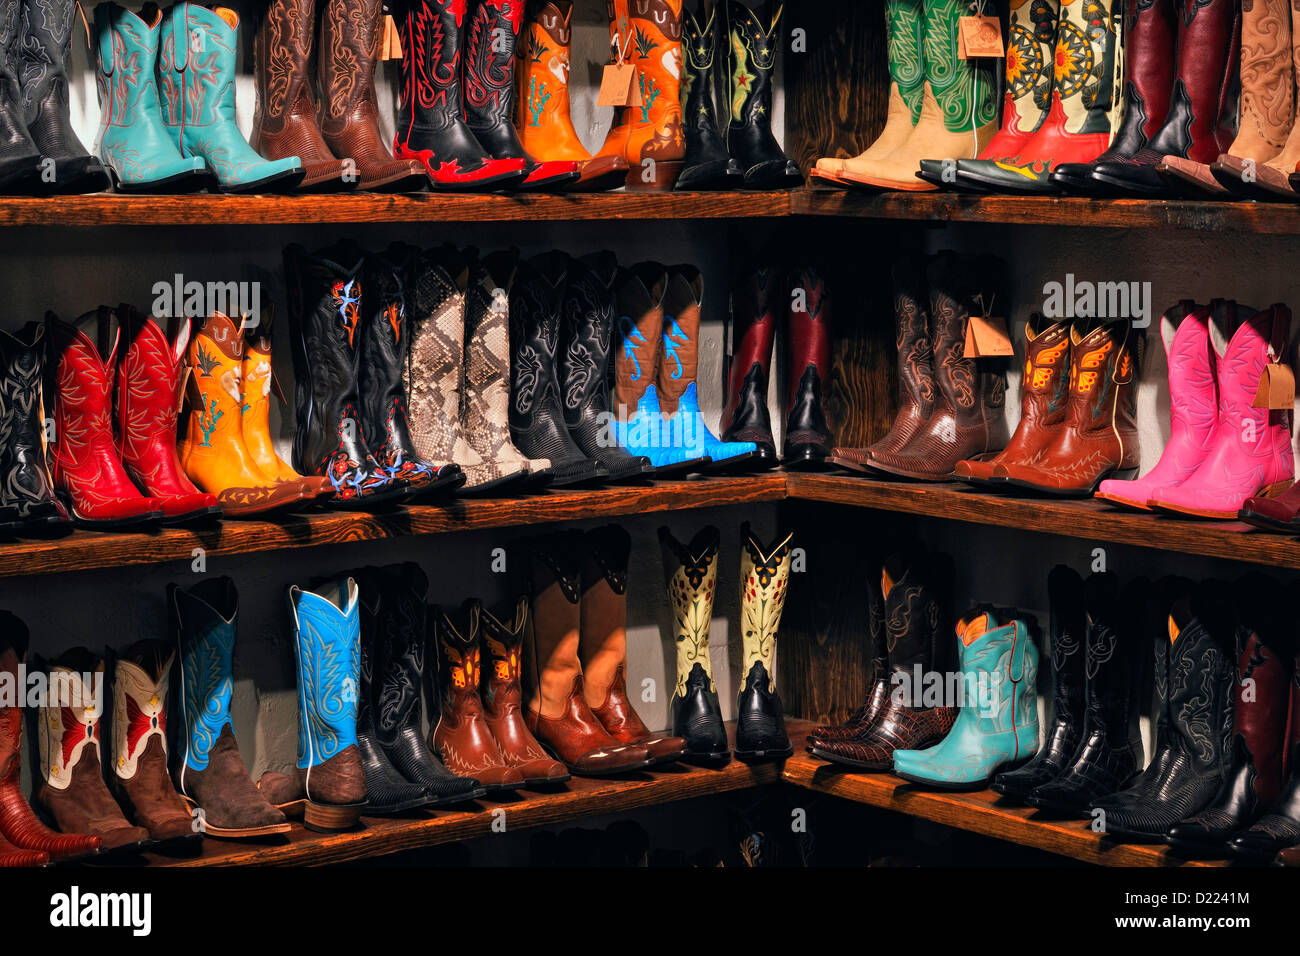 Western boots for sale in a shop- 'Boots Boogie', Santa Fe, New Mexico, USA Stock Photo